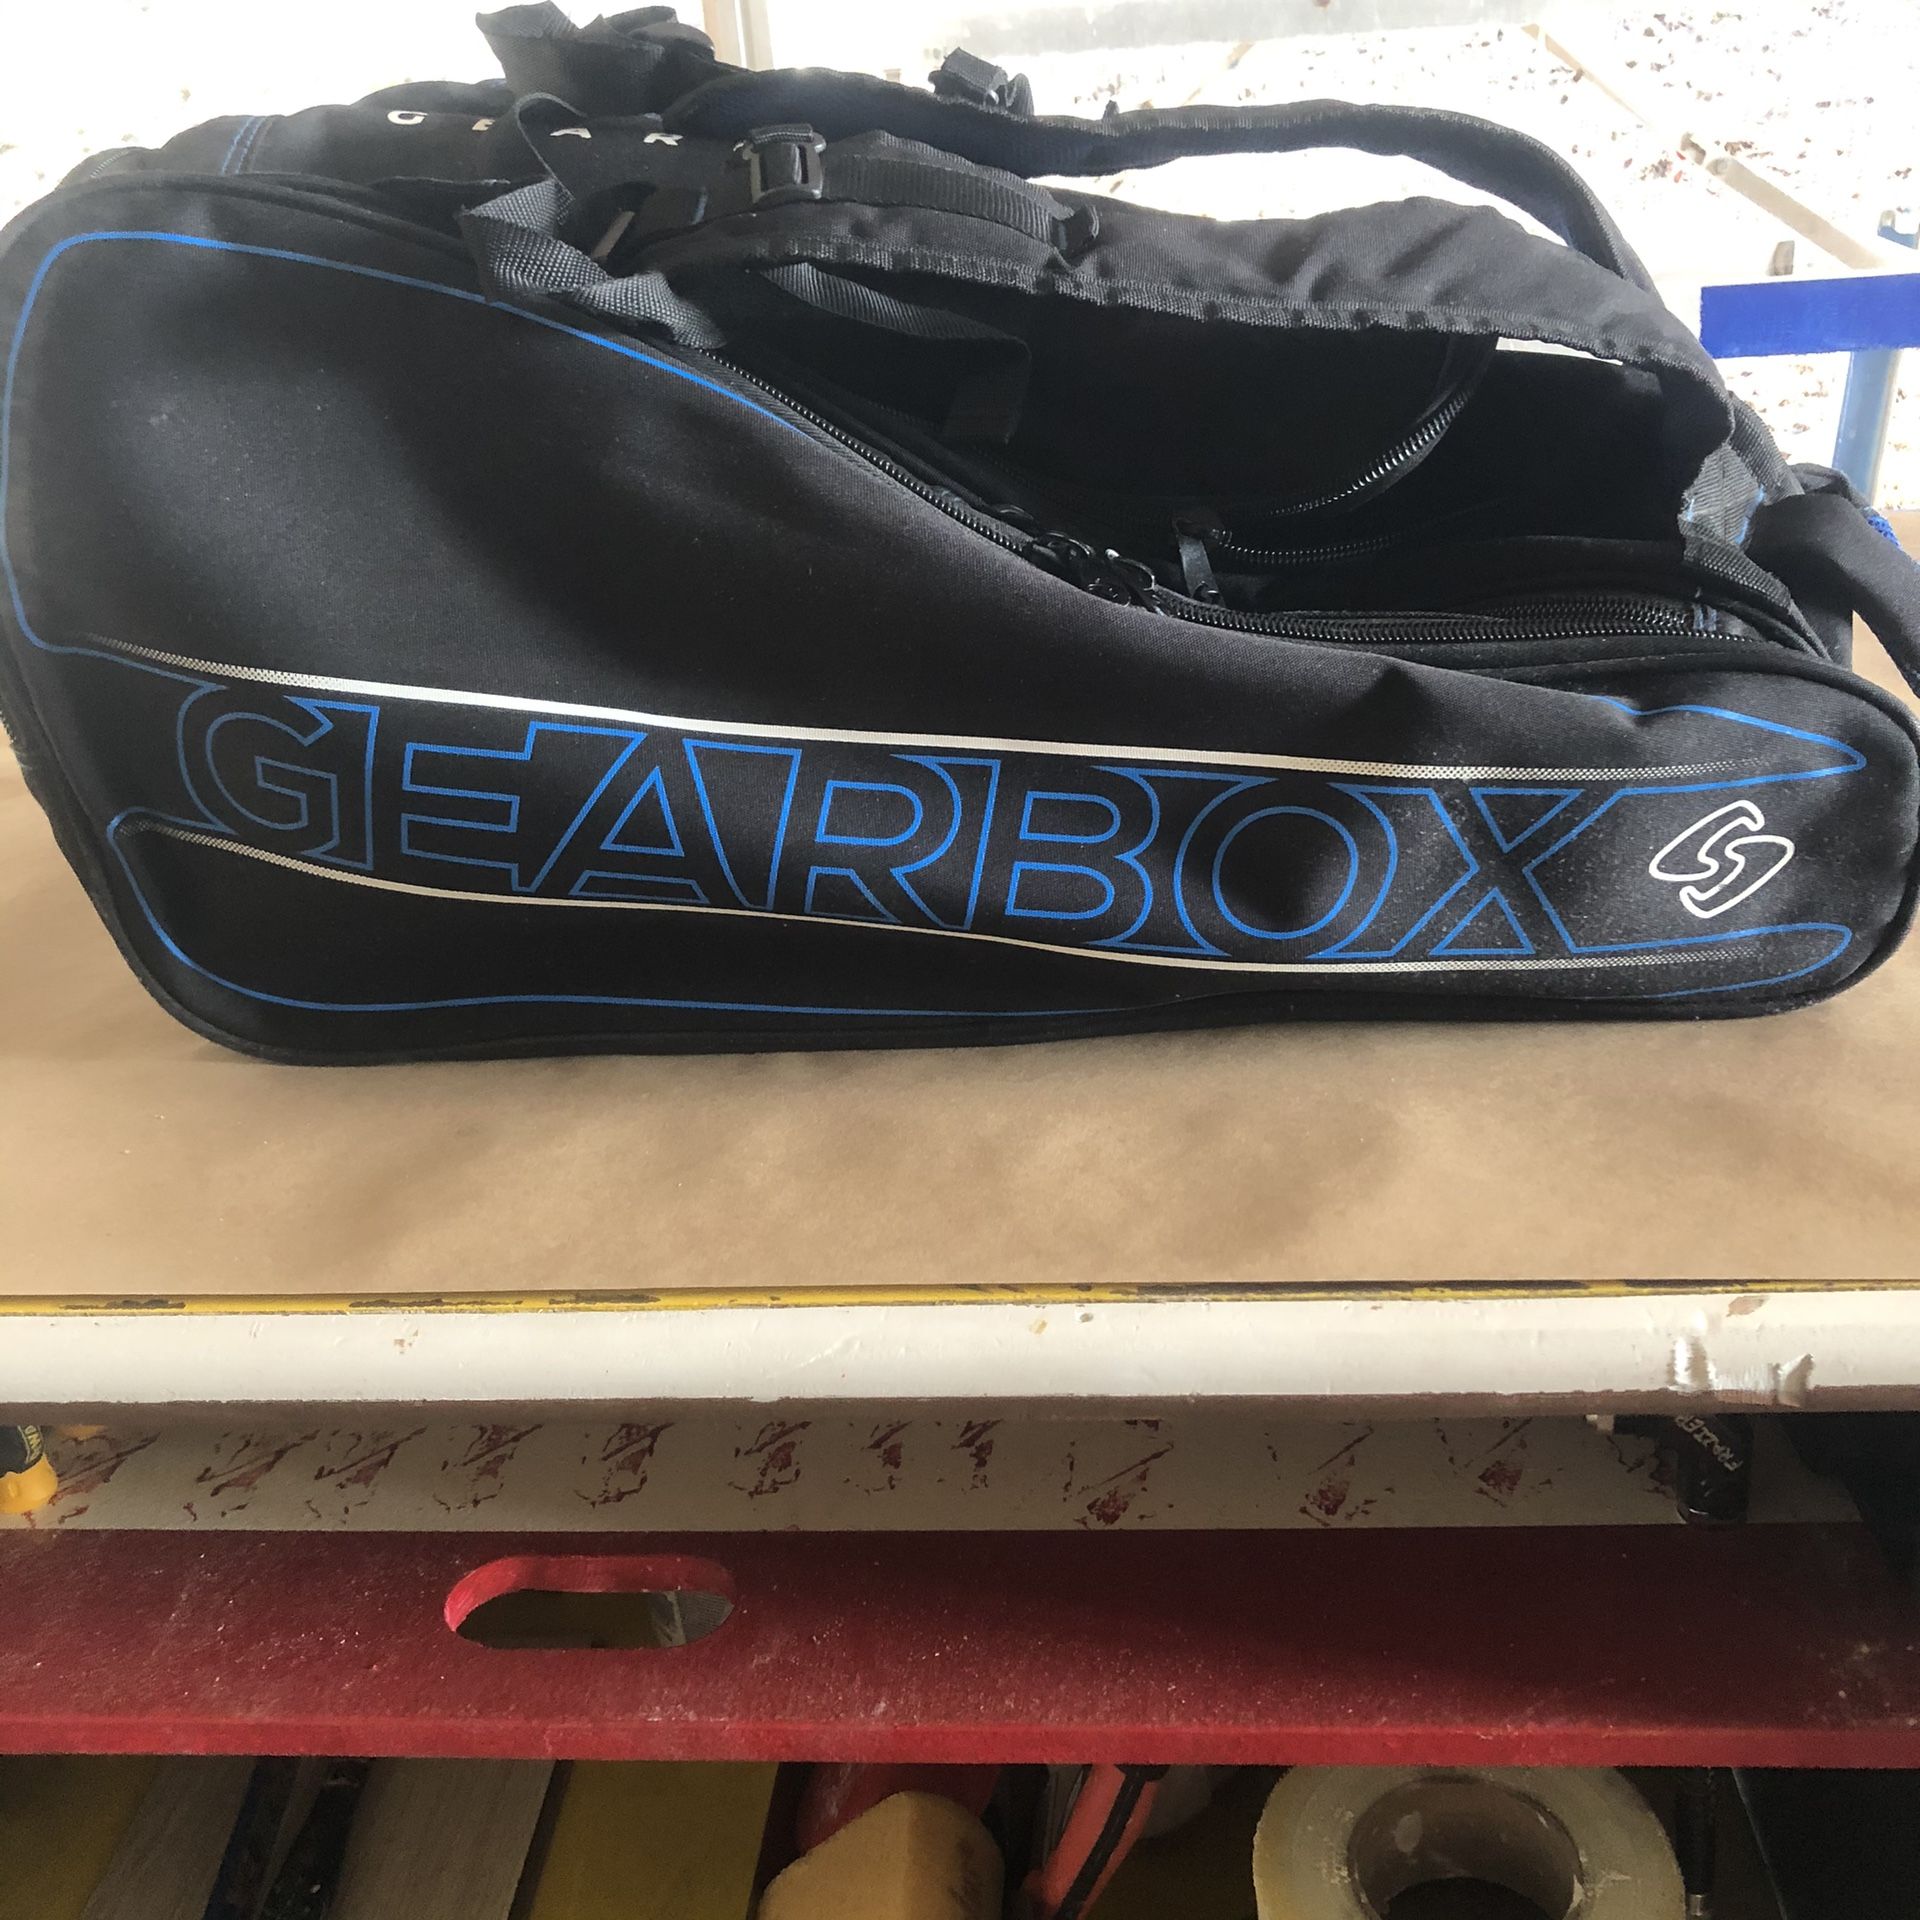 Gearbox racquetball court bag Backpack 